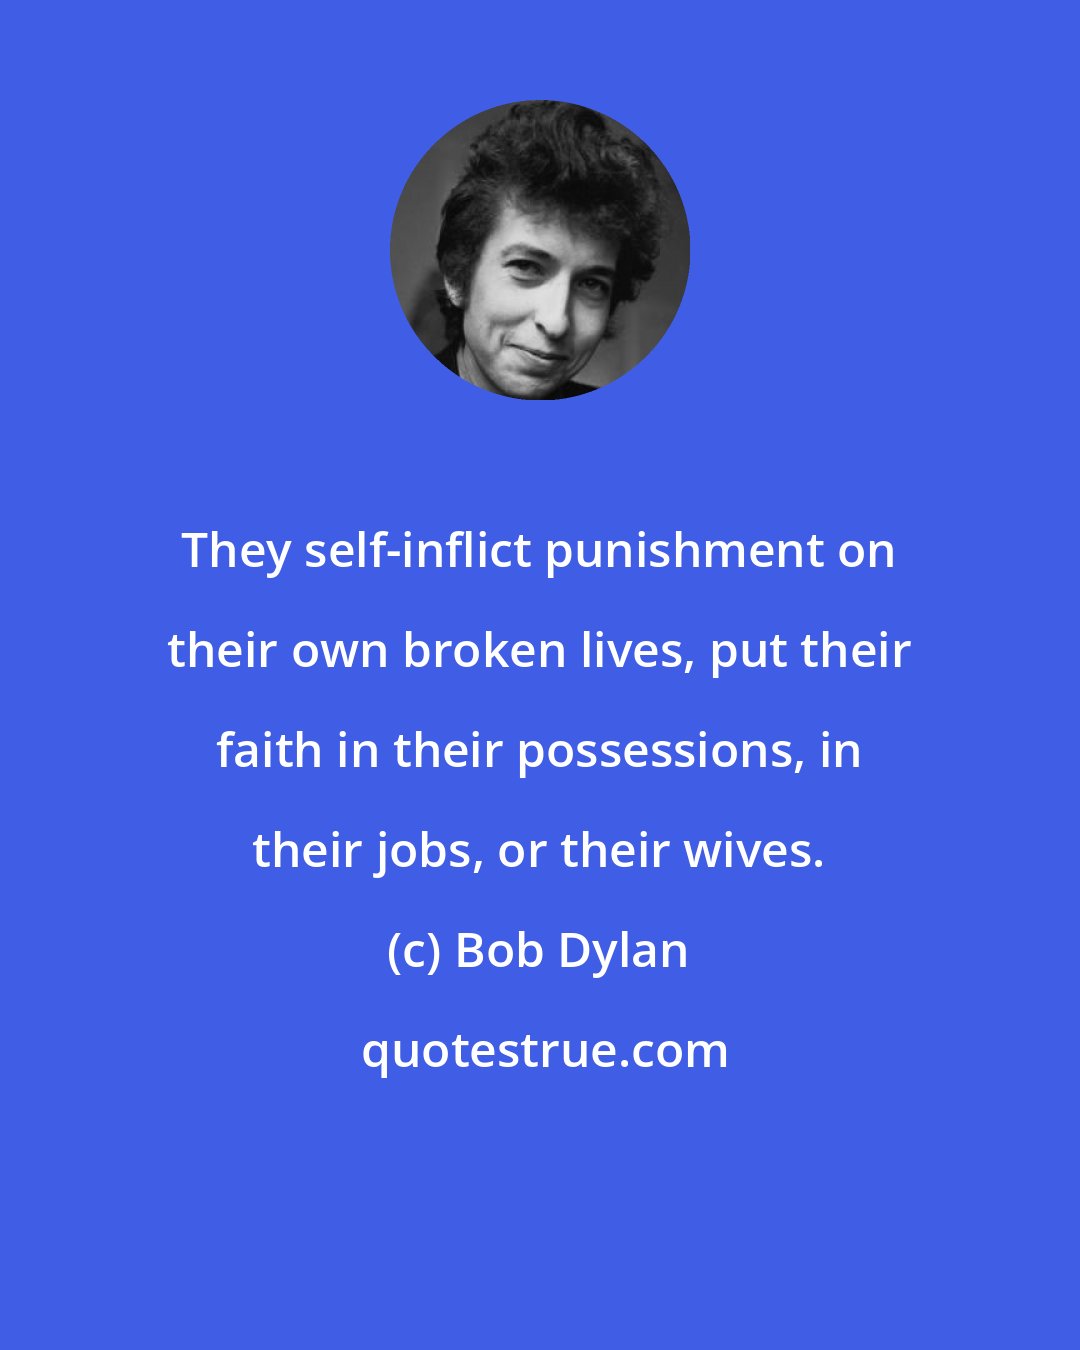 Bob Dylan: They self-inflict punishment on their own broken lives, put their faith in their possessions, in their jobs, or their wives.